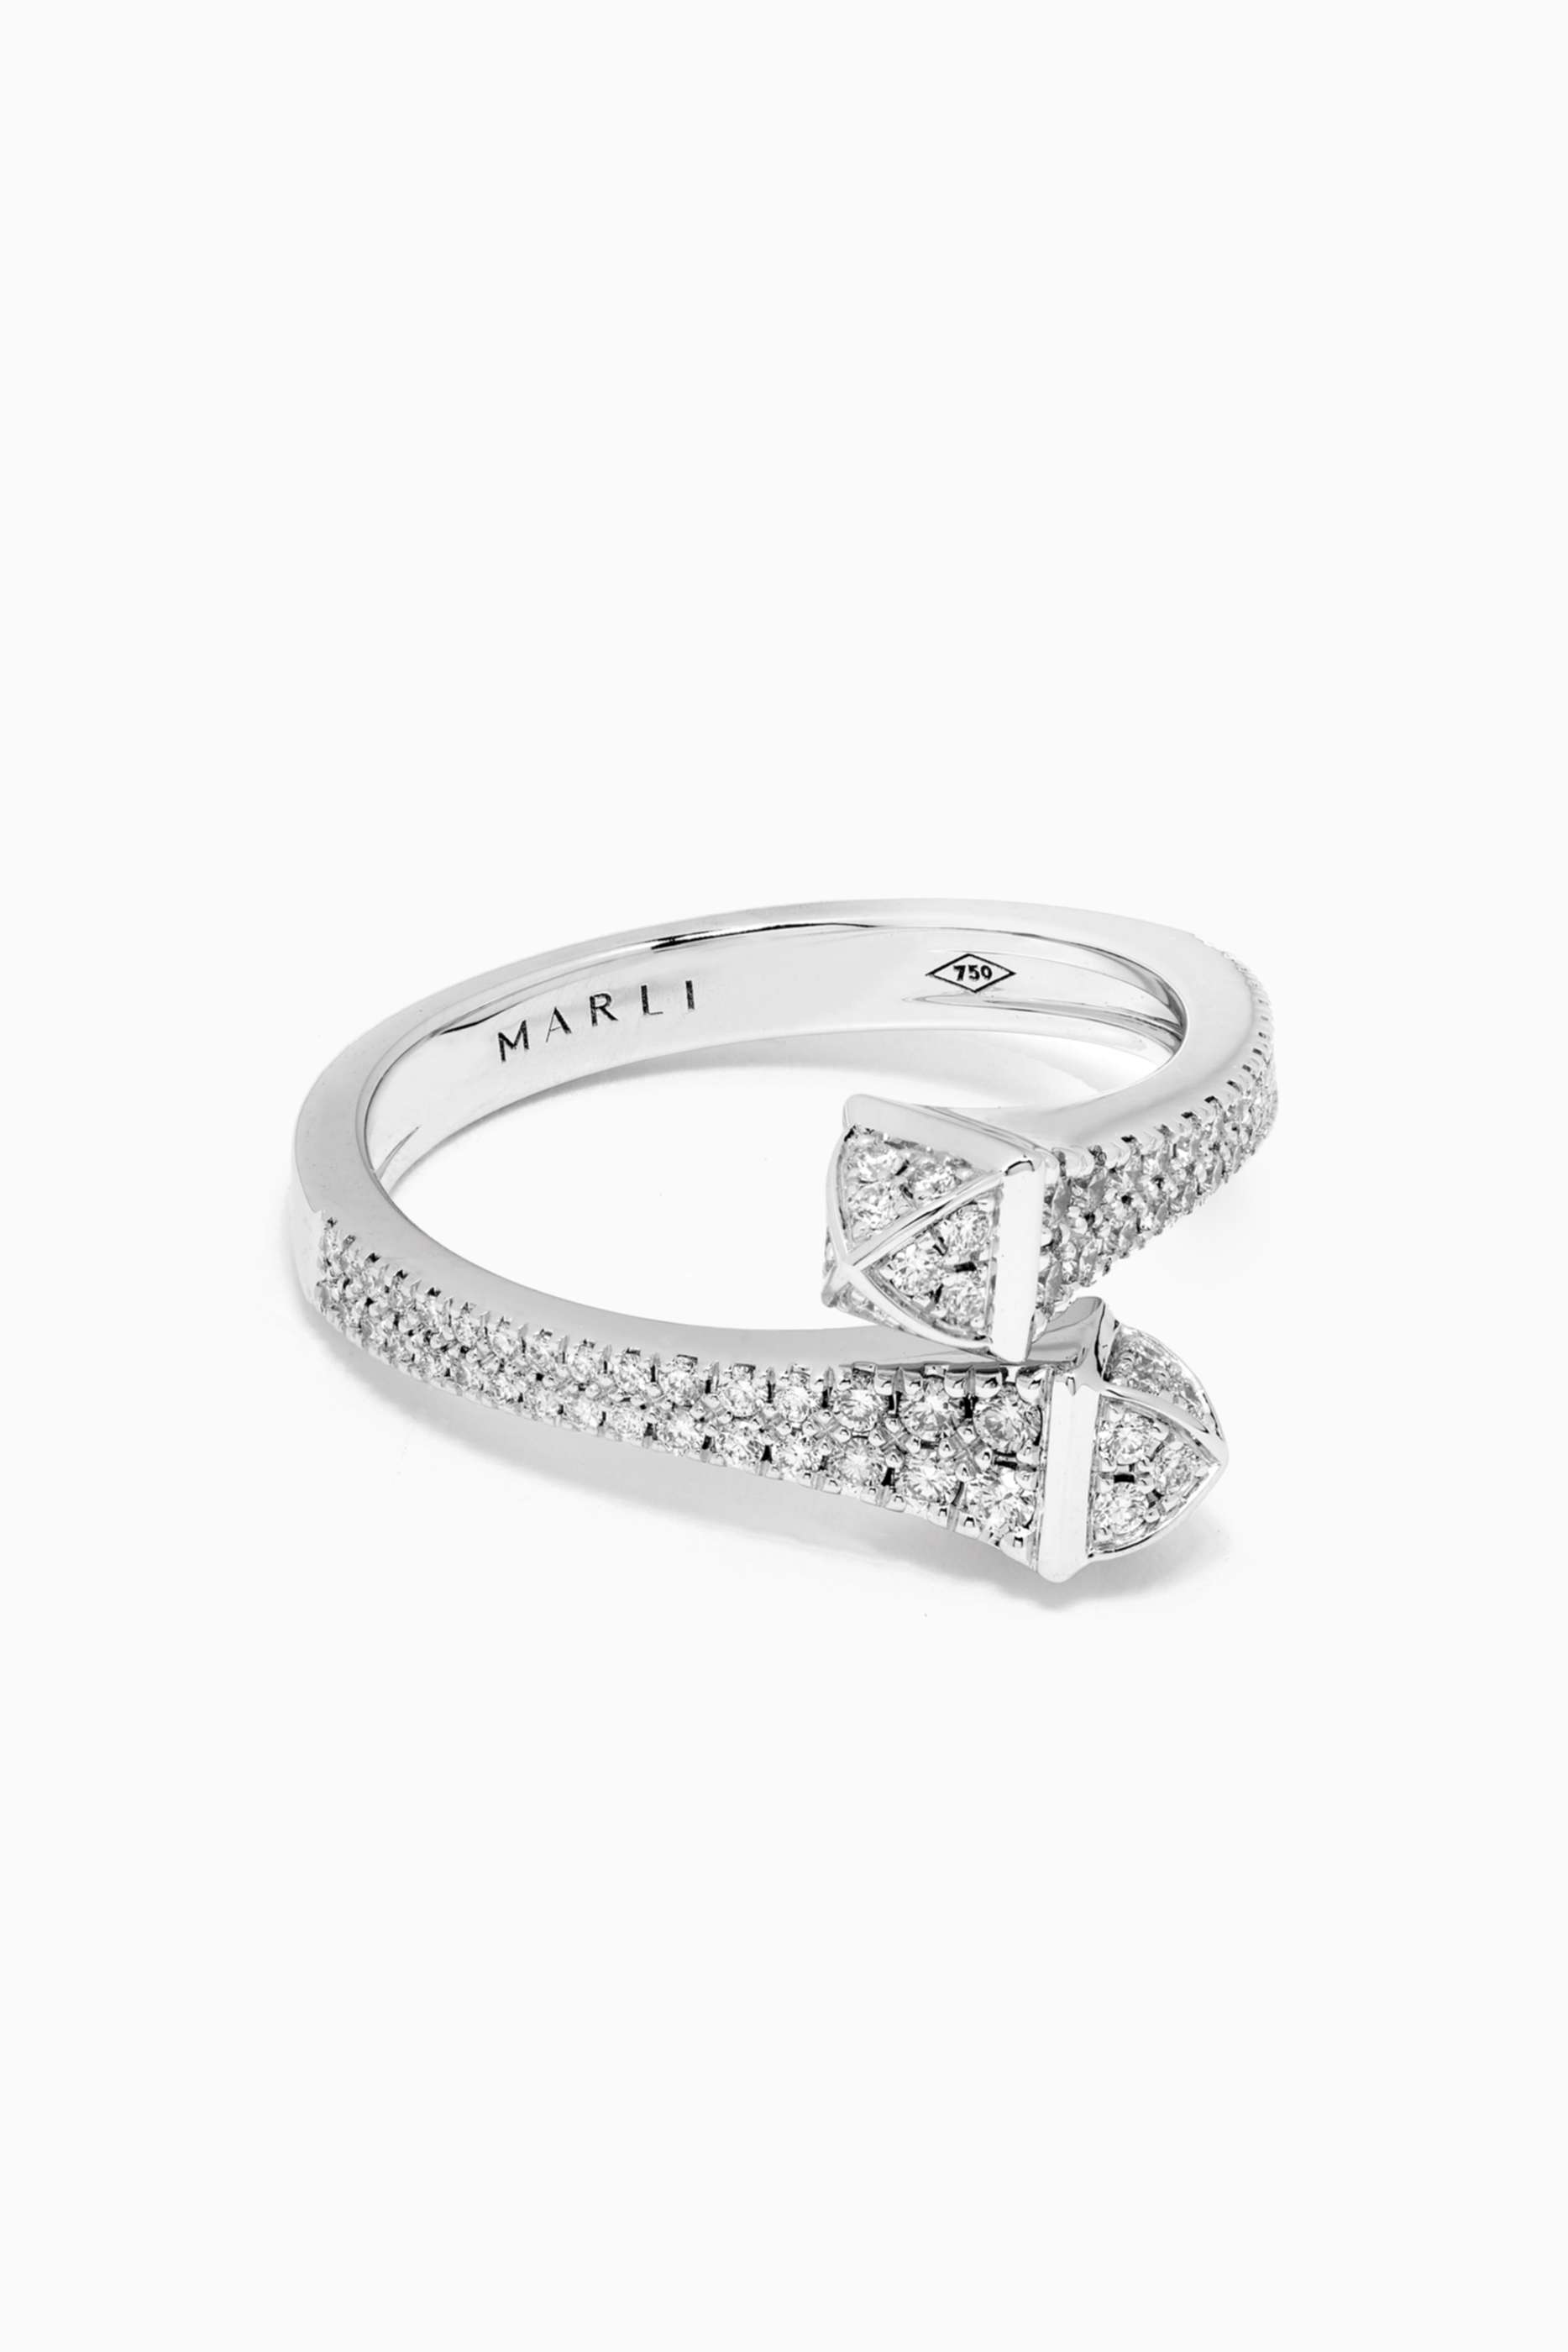 Shop Marli Silver Cleo Diamond Wrap Ring in 18kt White Gold for 